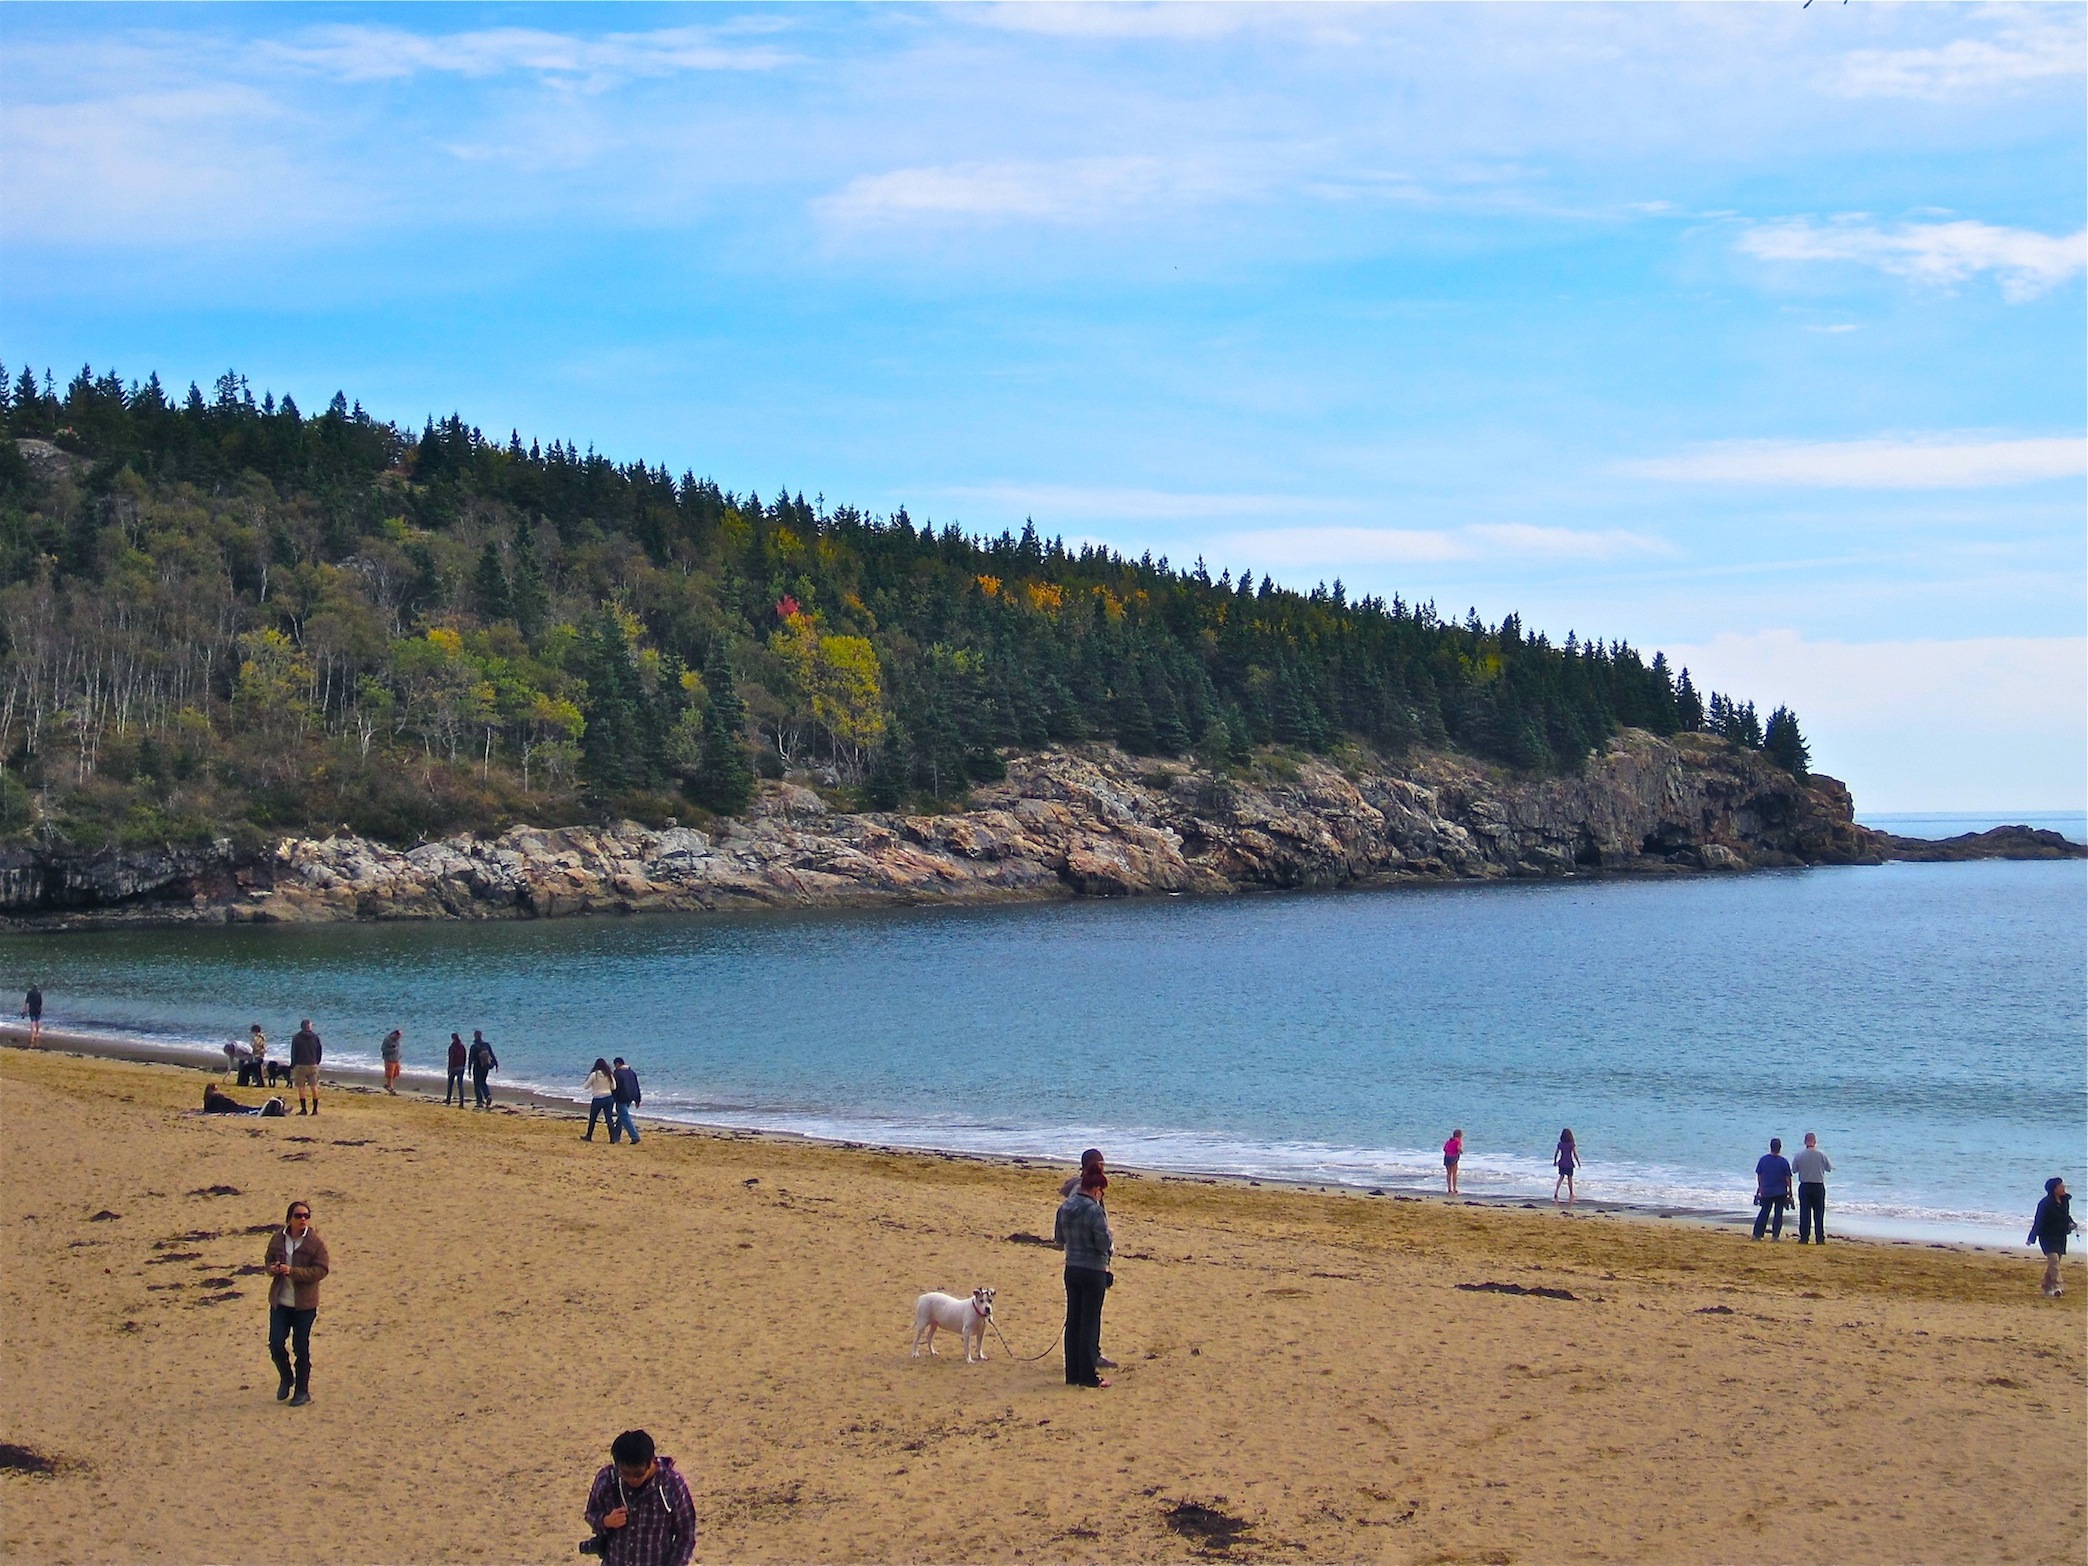 At Sand Beach (user submitted)